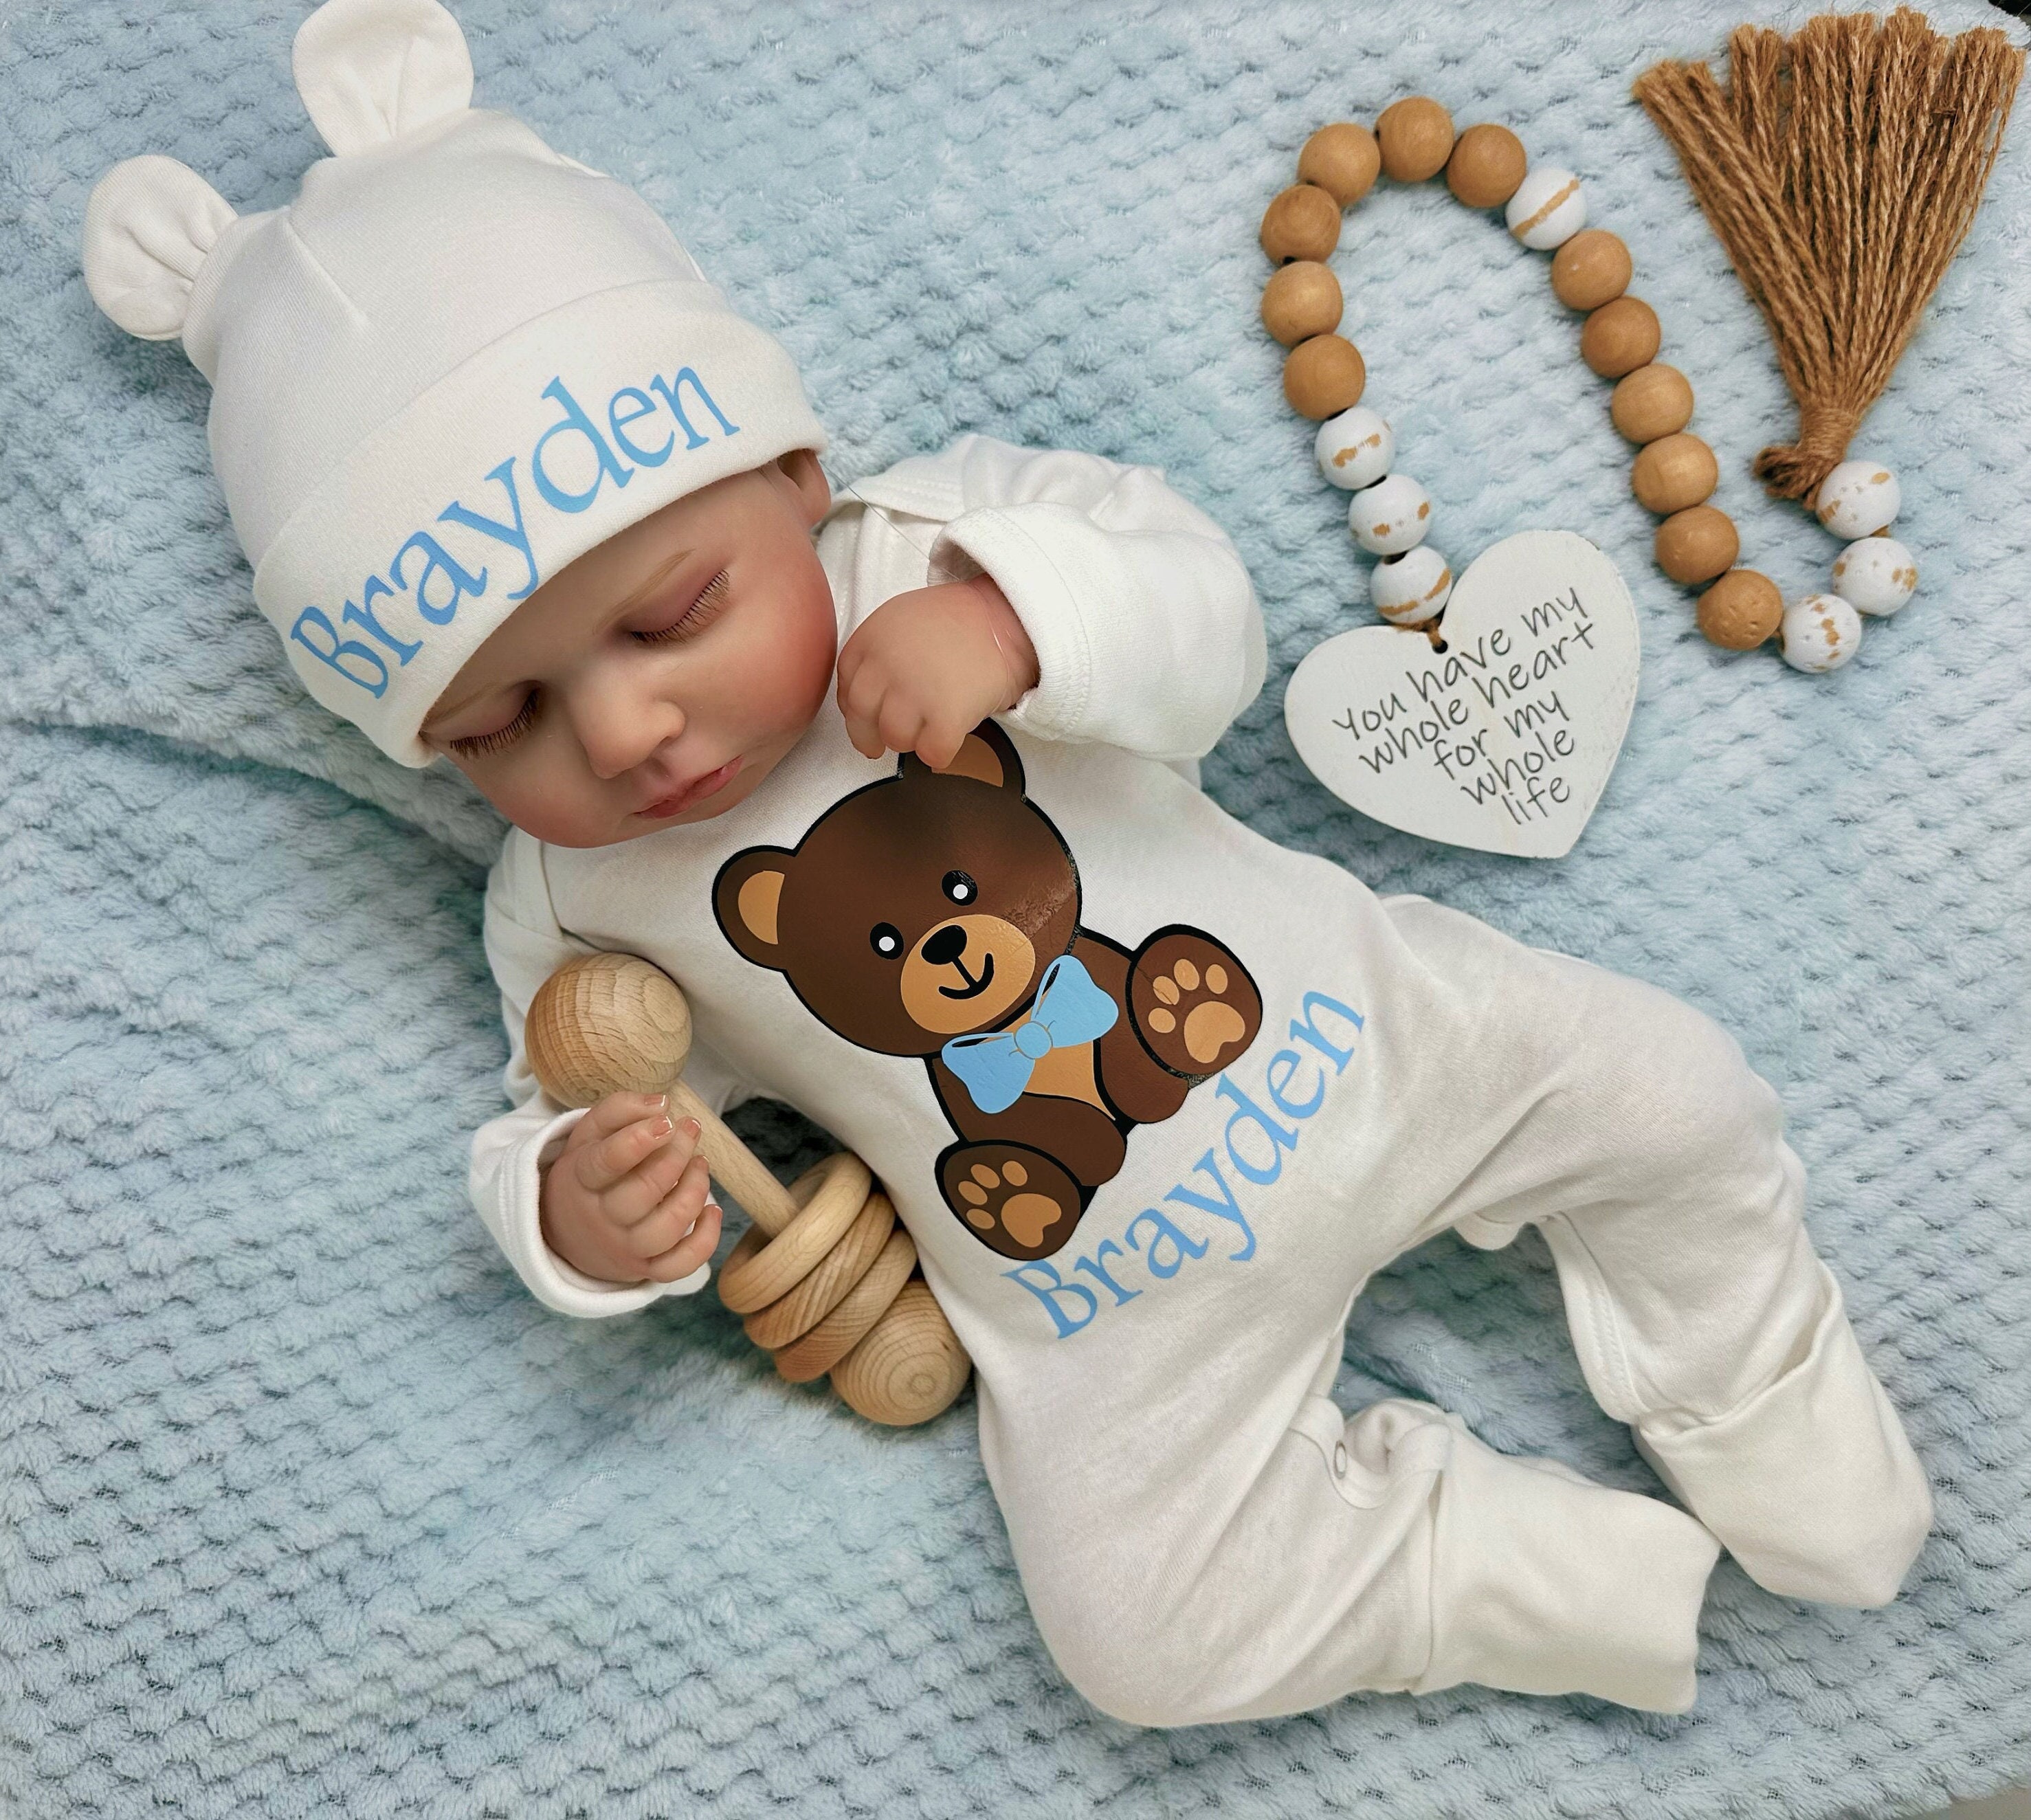 Memory Fox, Toys Made of Baby Clothes, Personalized Stuffed Toys